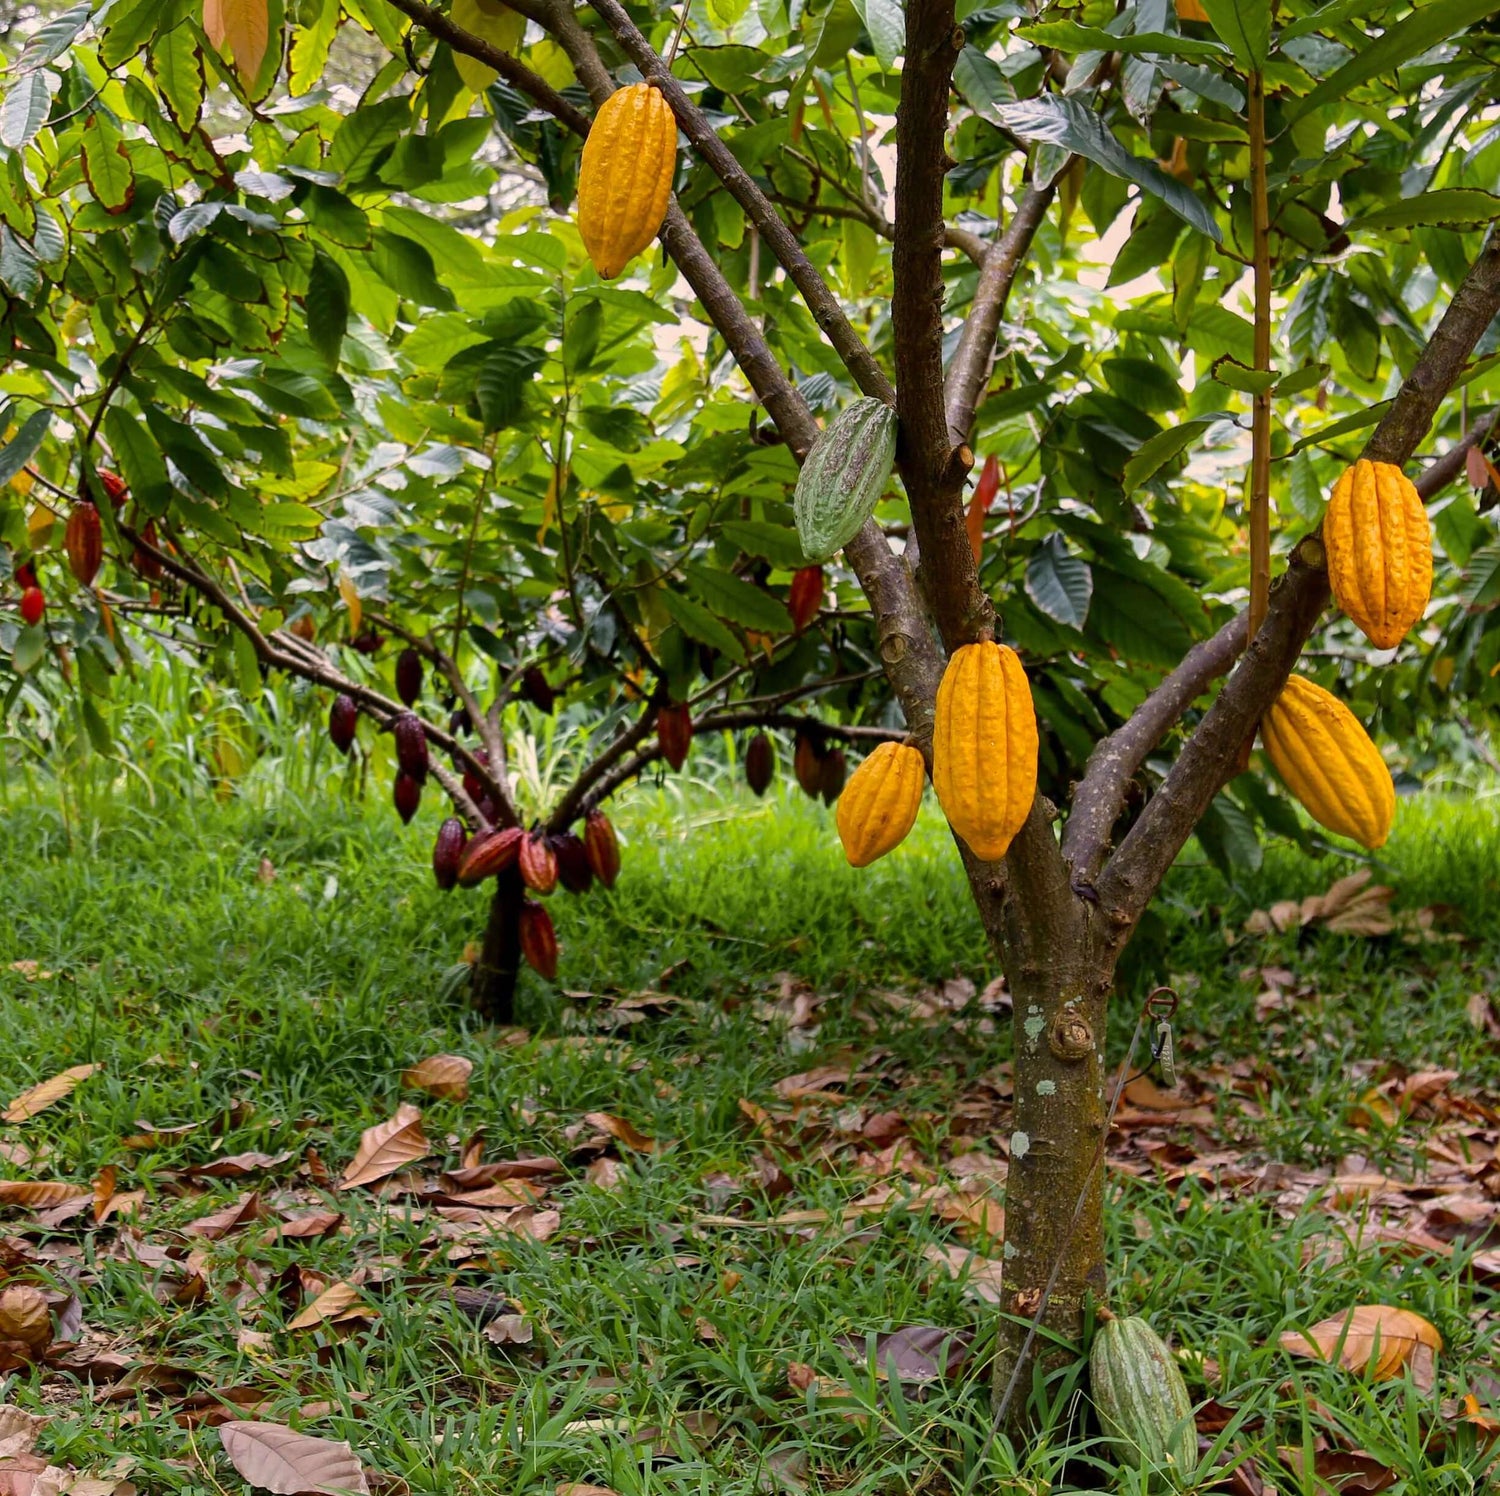 Cacao trees